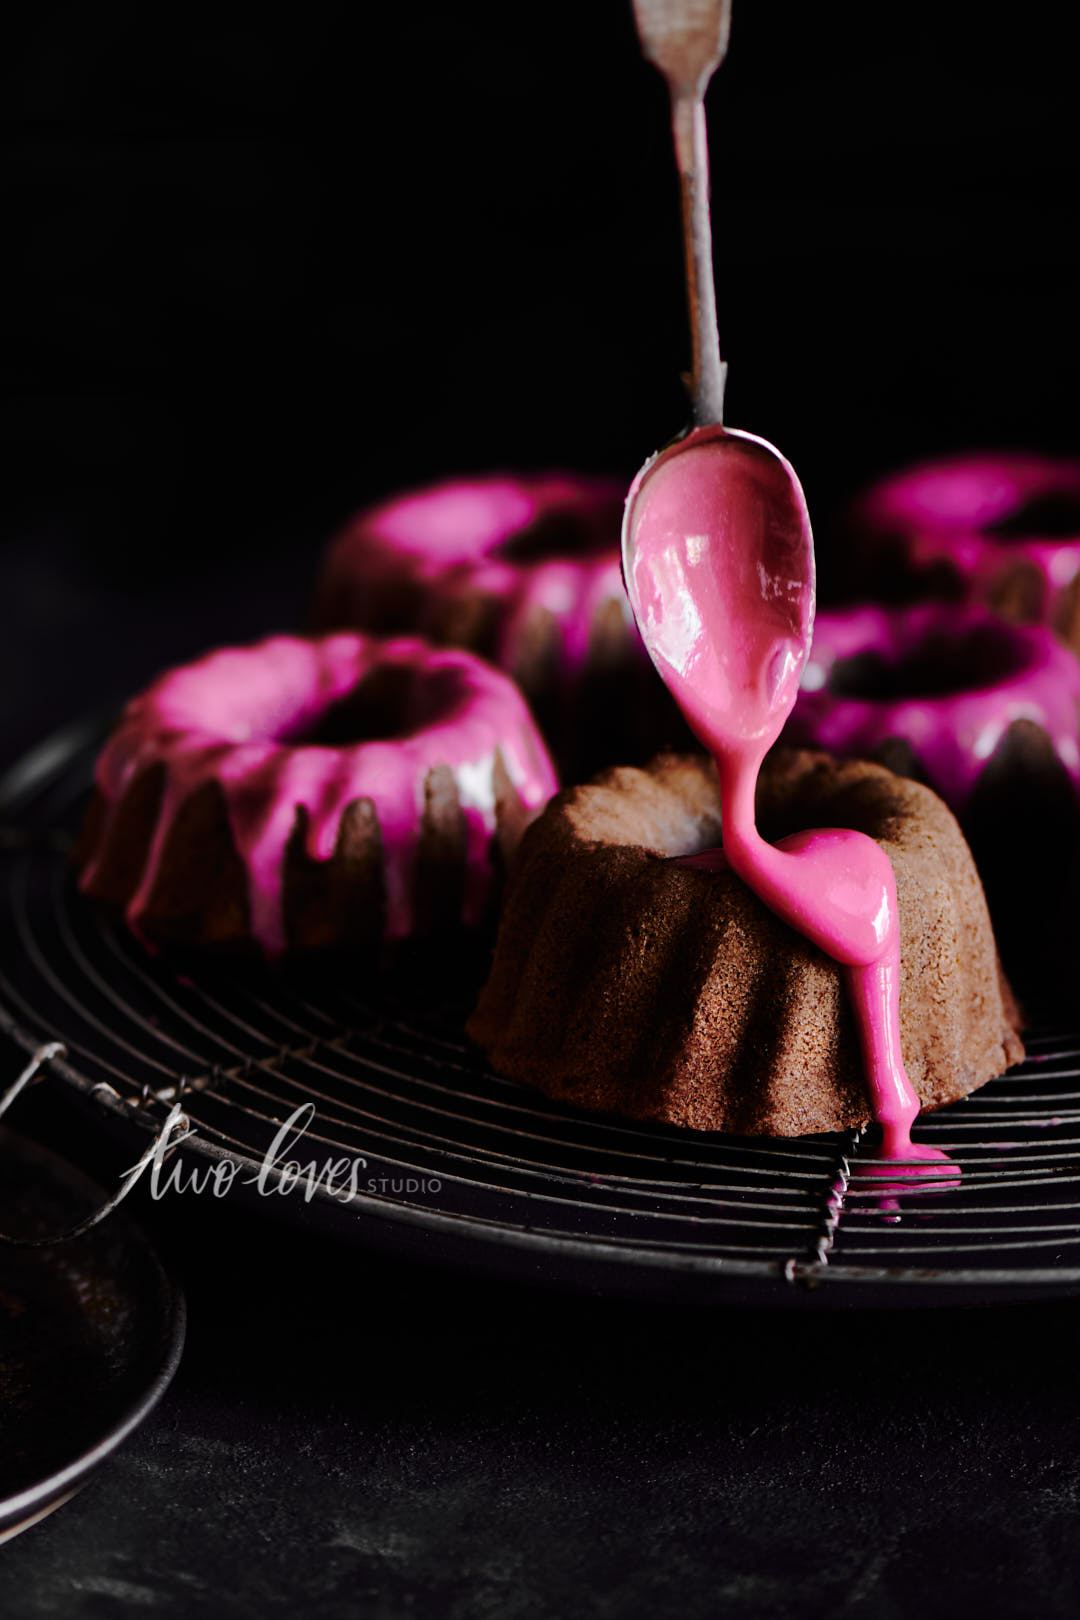 Use a tripod and a fast shutter speed to capture motion in your food photography.